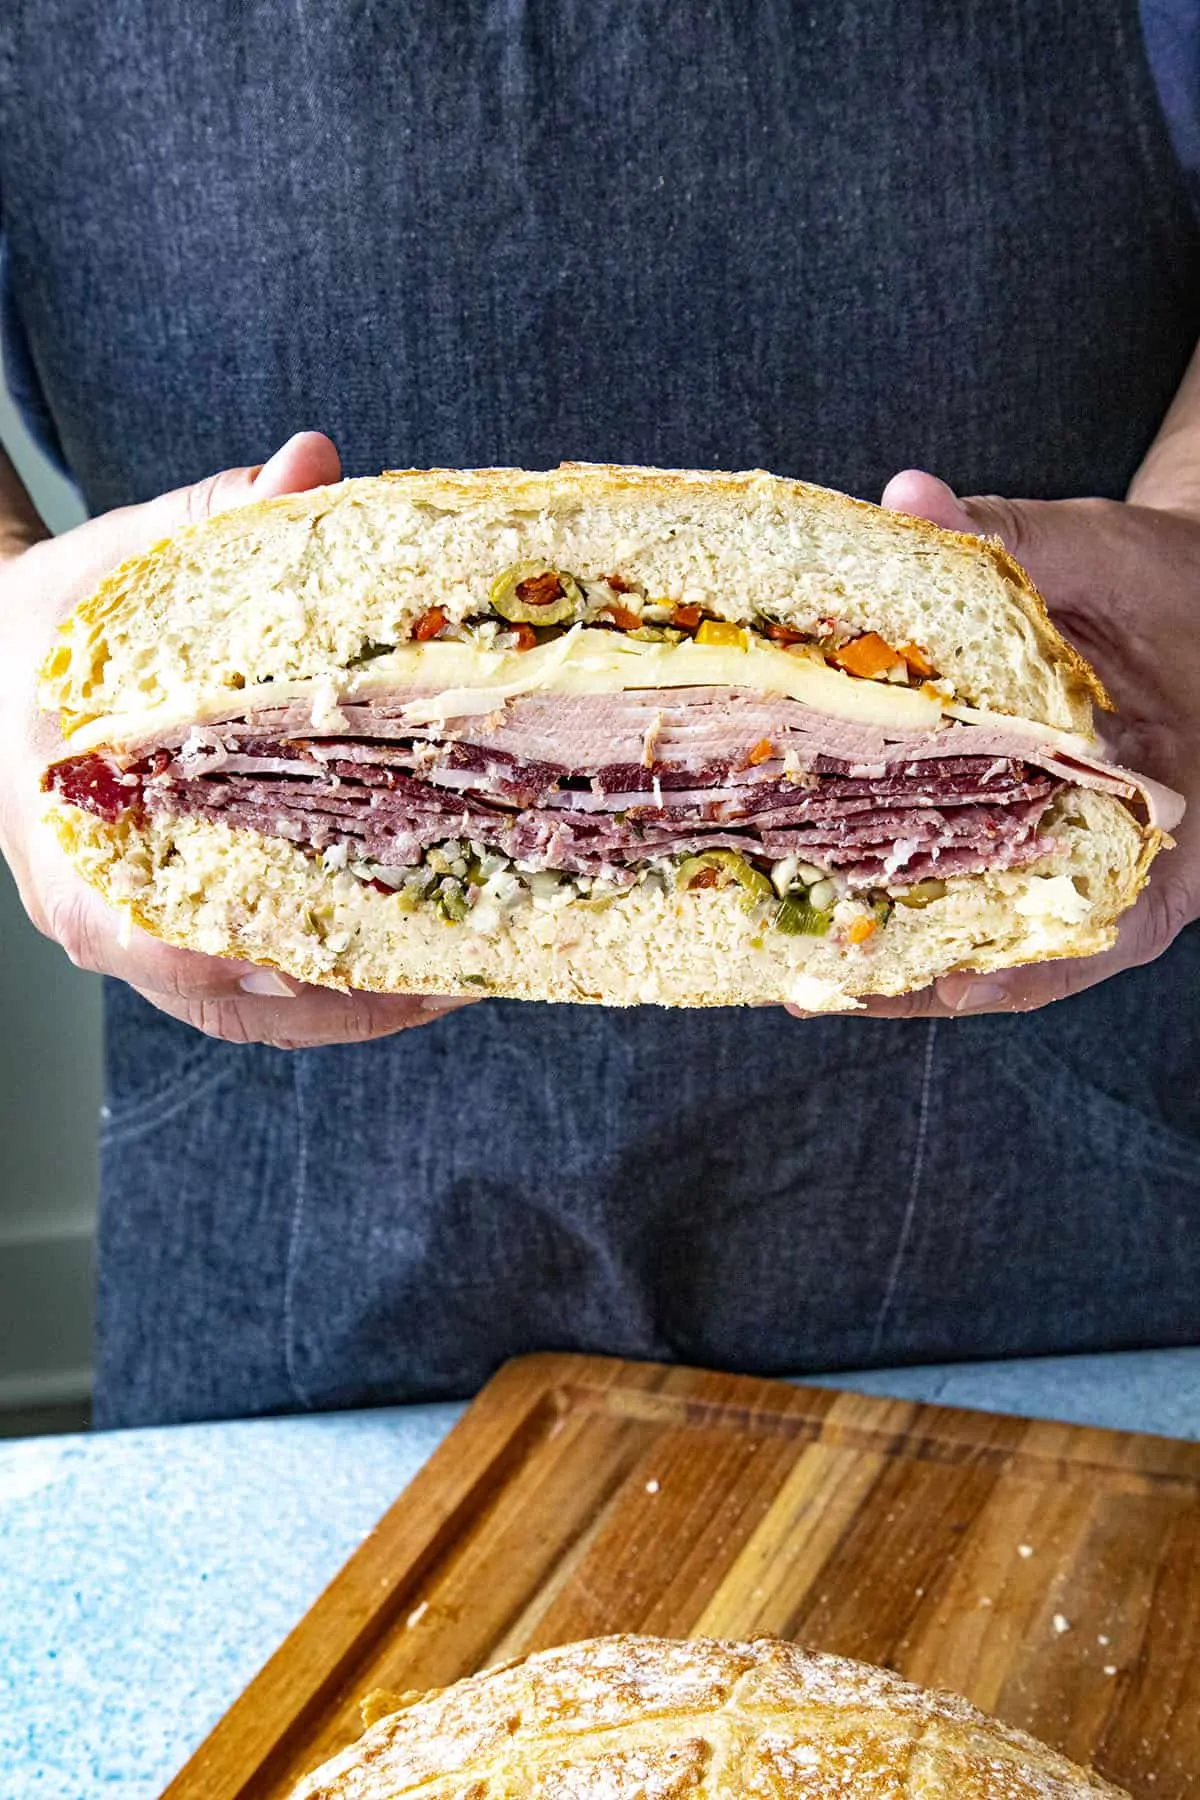 A thick and meaty Muffaletta sandwich sliced in half